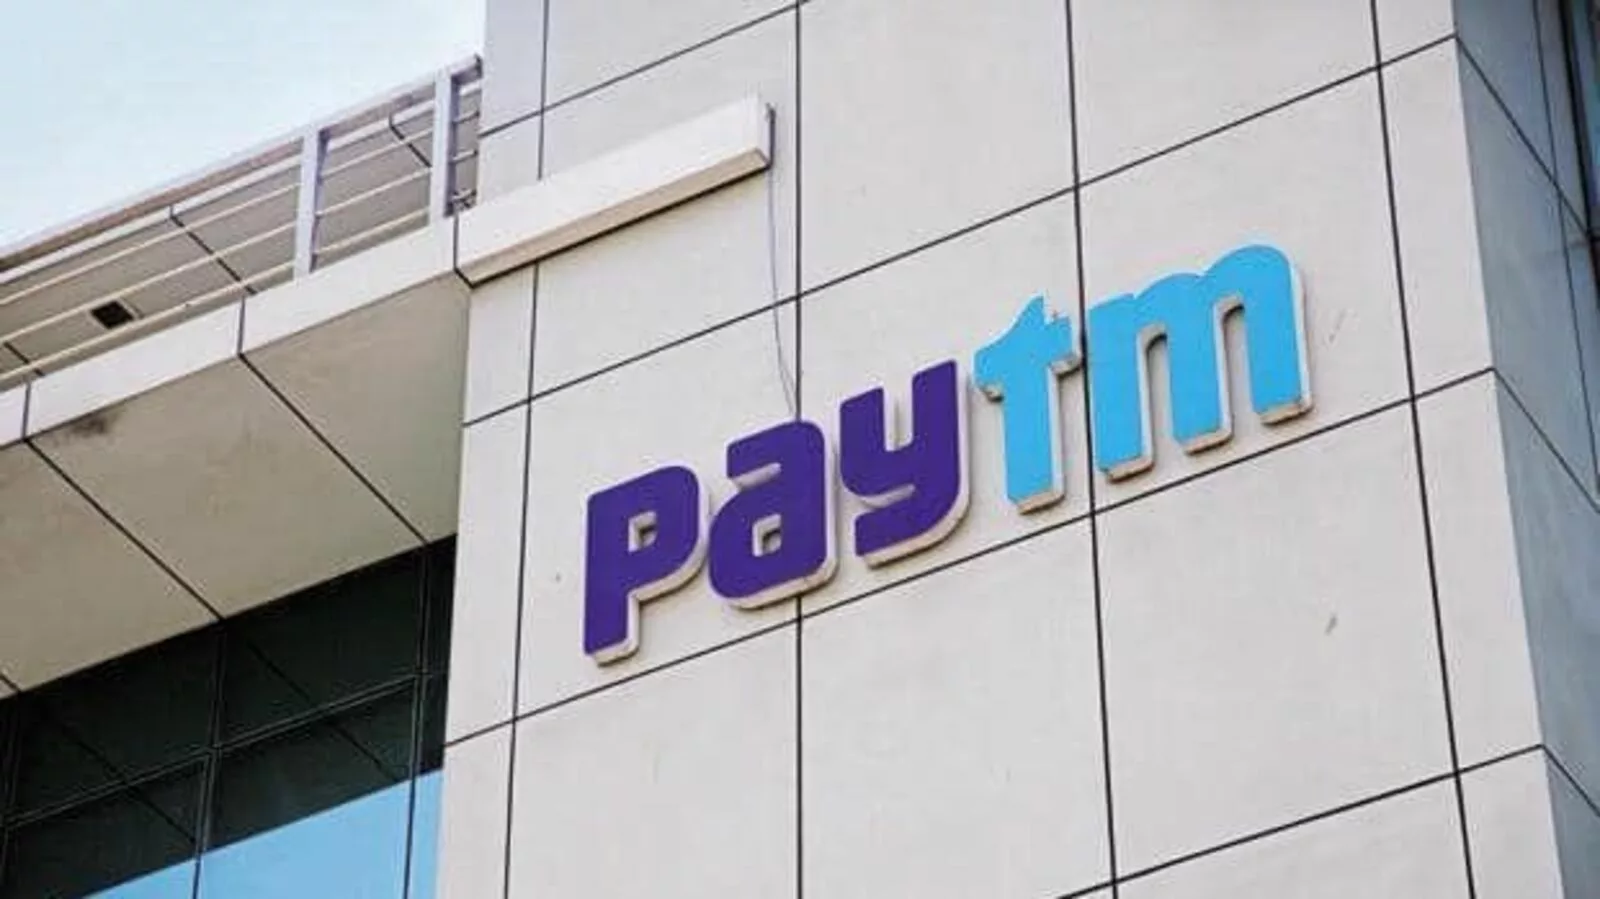 Why ED is probing Paytm Payments Bank? All you need to know